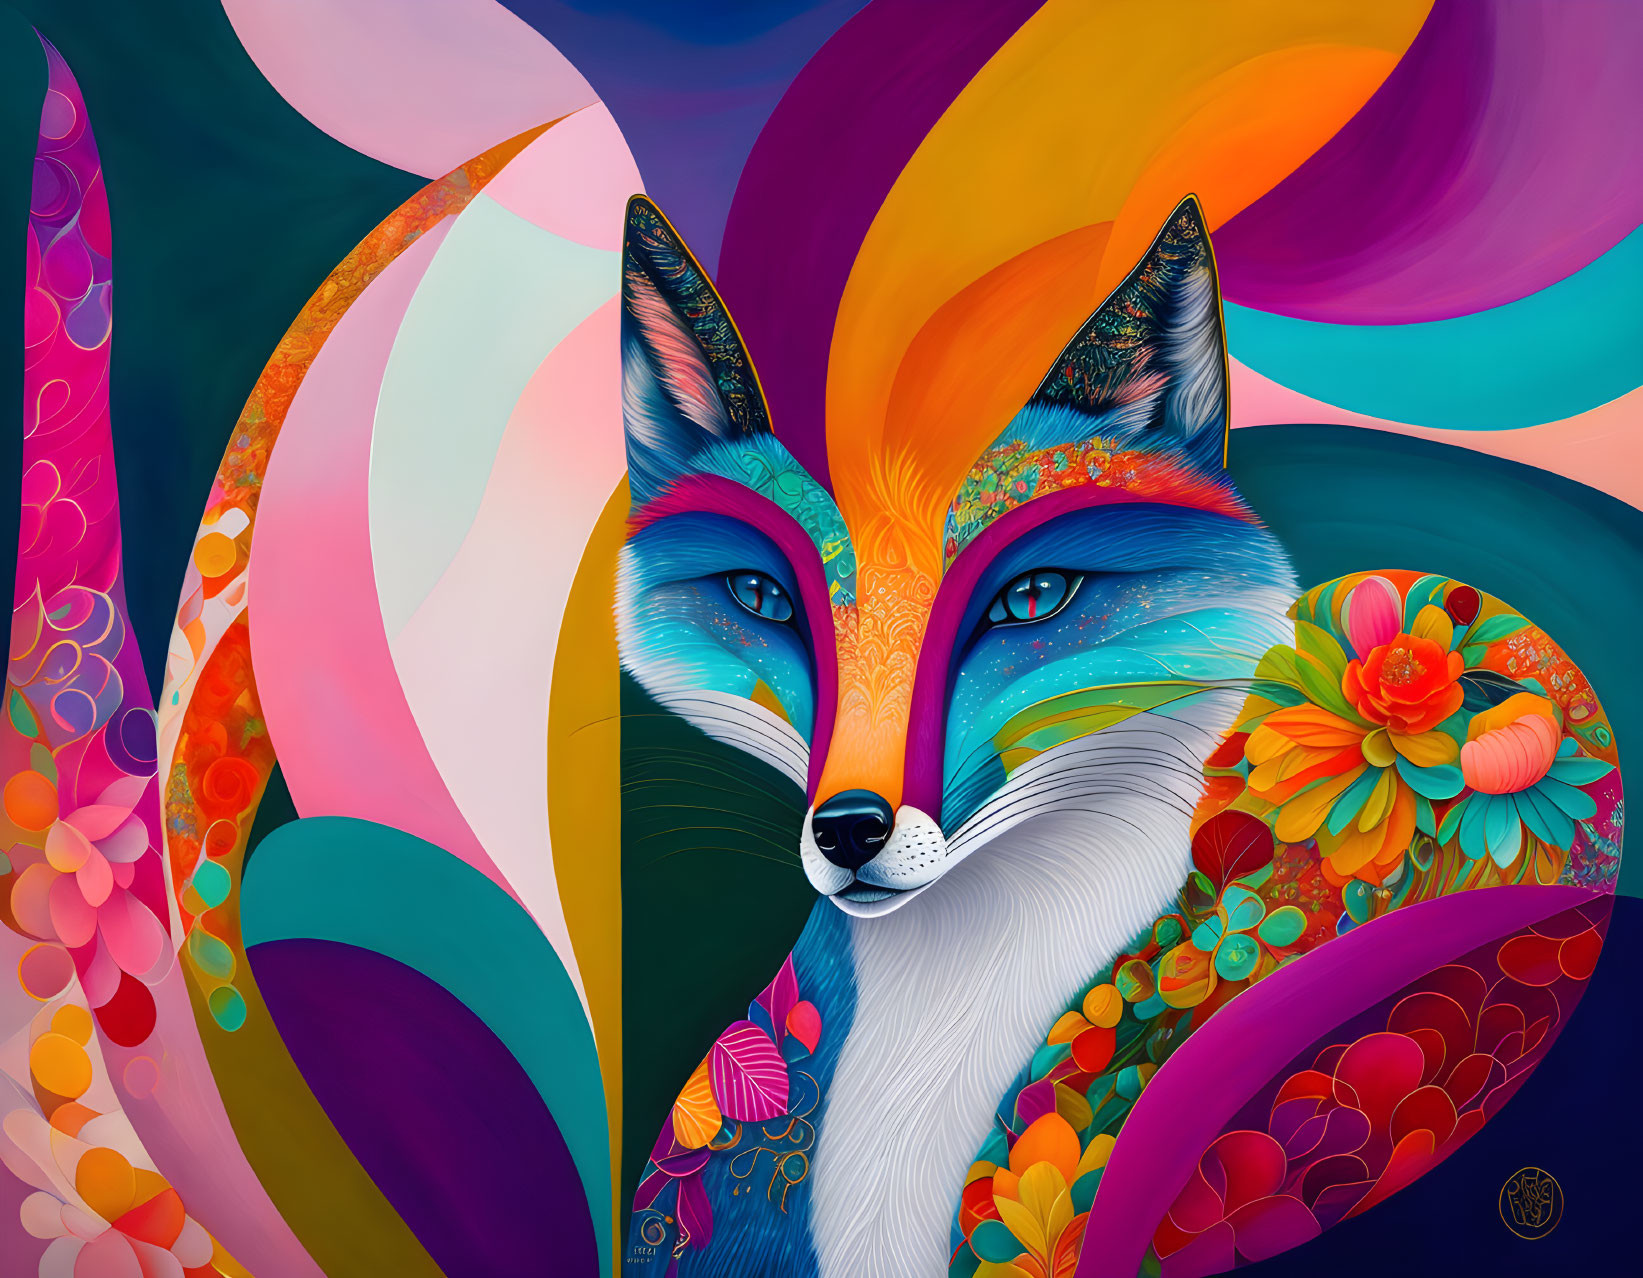 Colorful Stylized Fox Illustration with Swirling Patterns in Blues, Oranges, and Pur